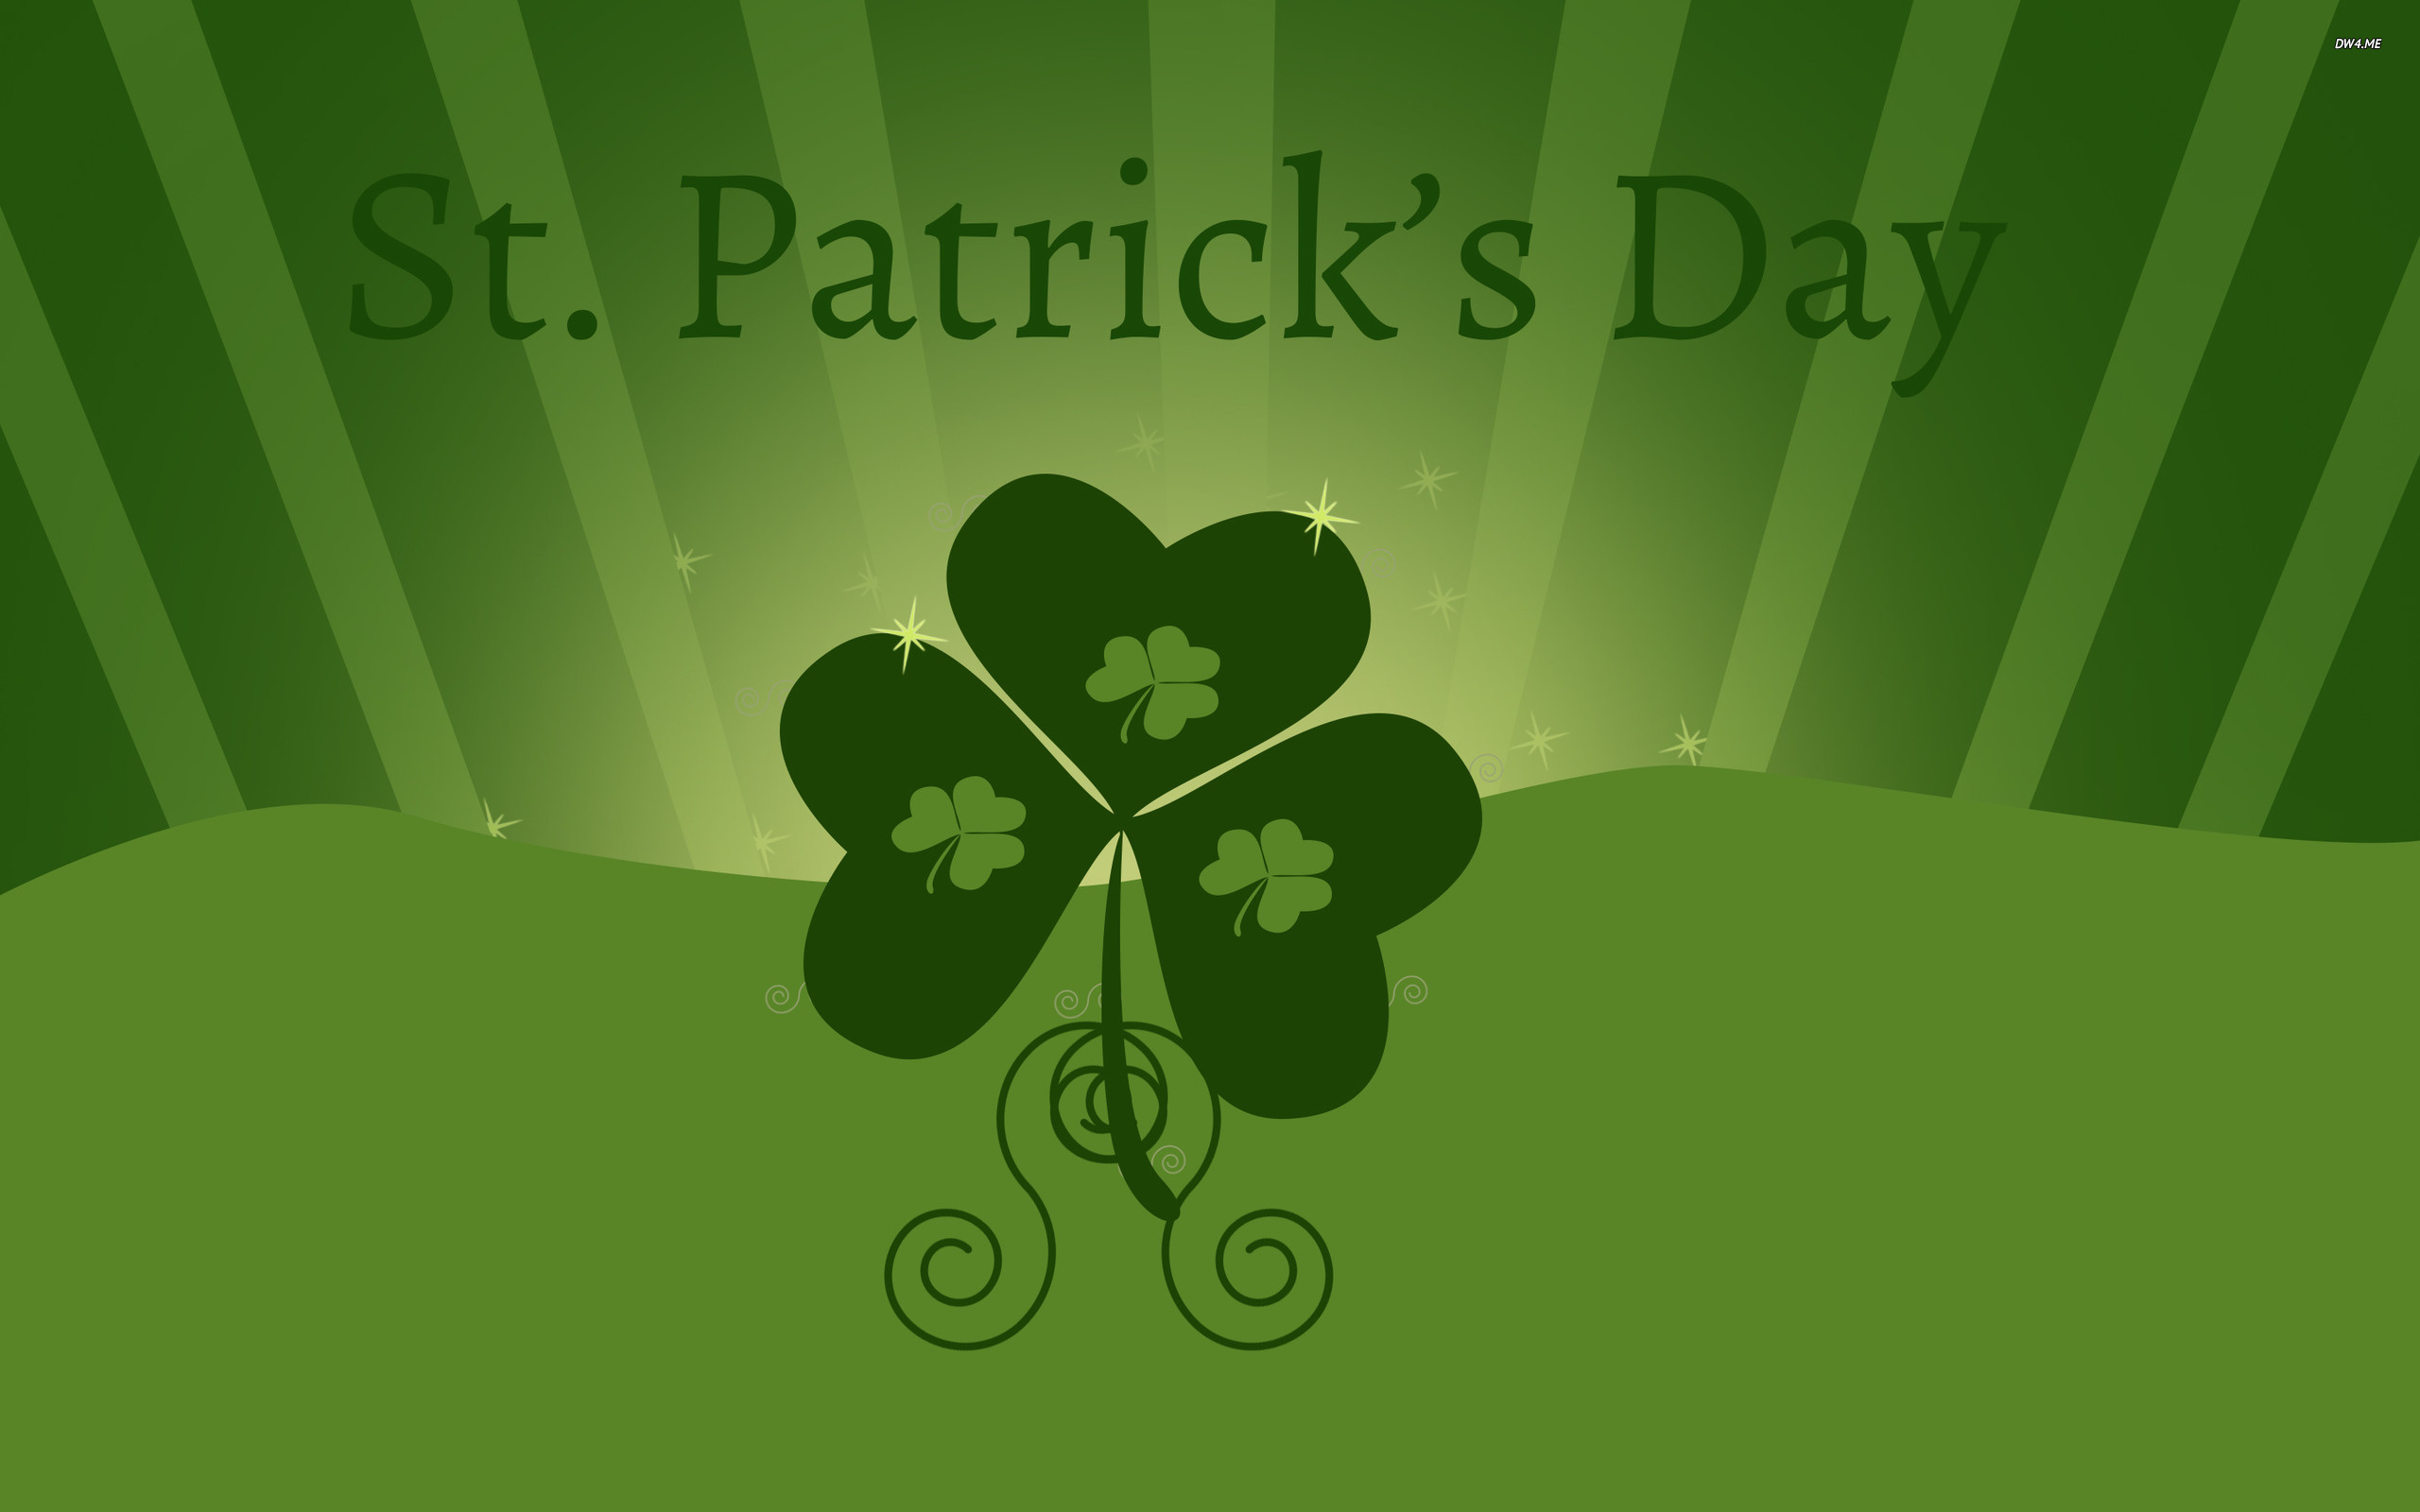 2560x1600 St. Patrick's Day wallpaper - Holiday wallpapers - #2621